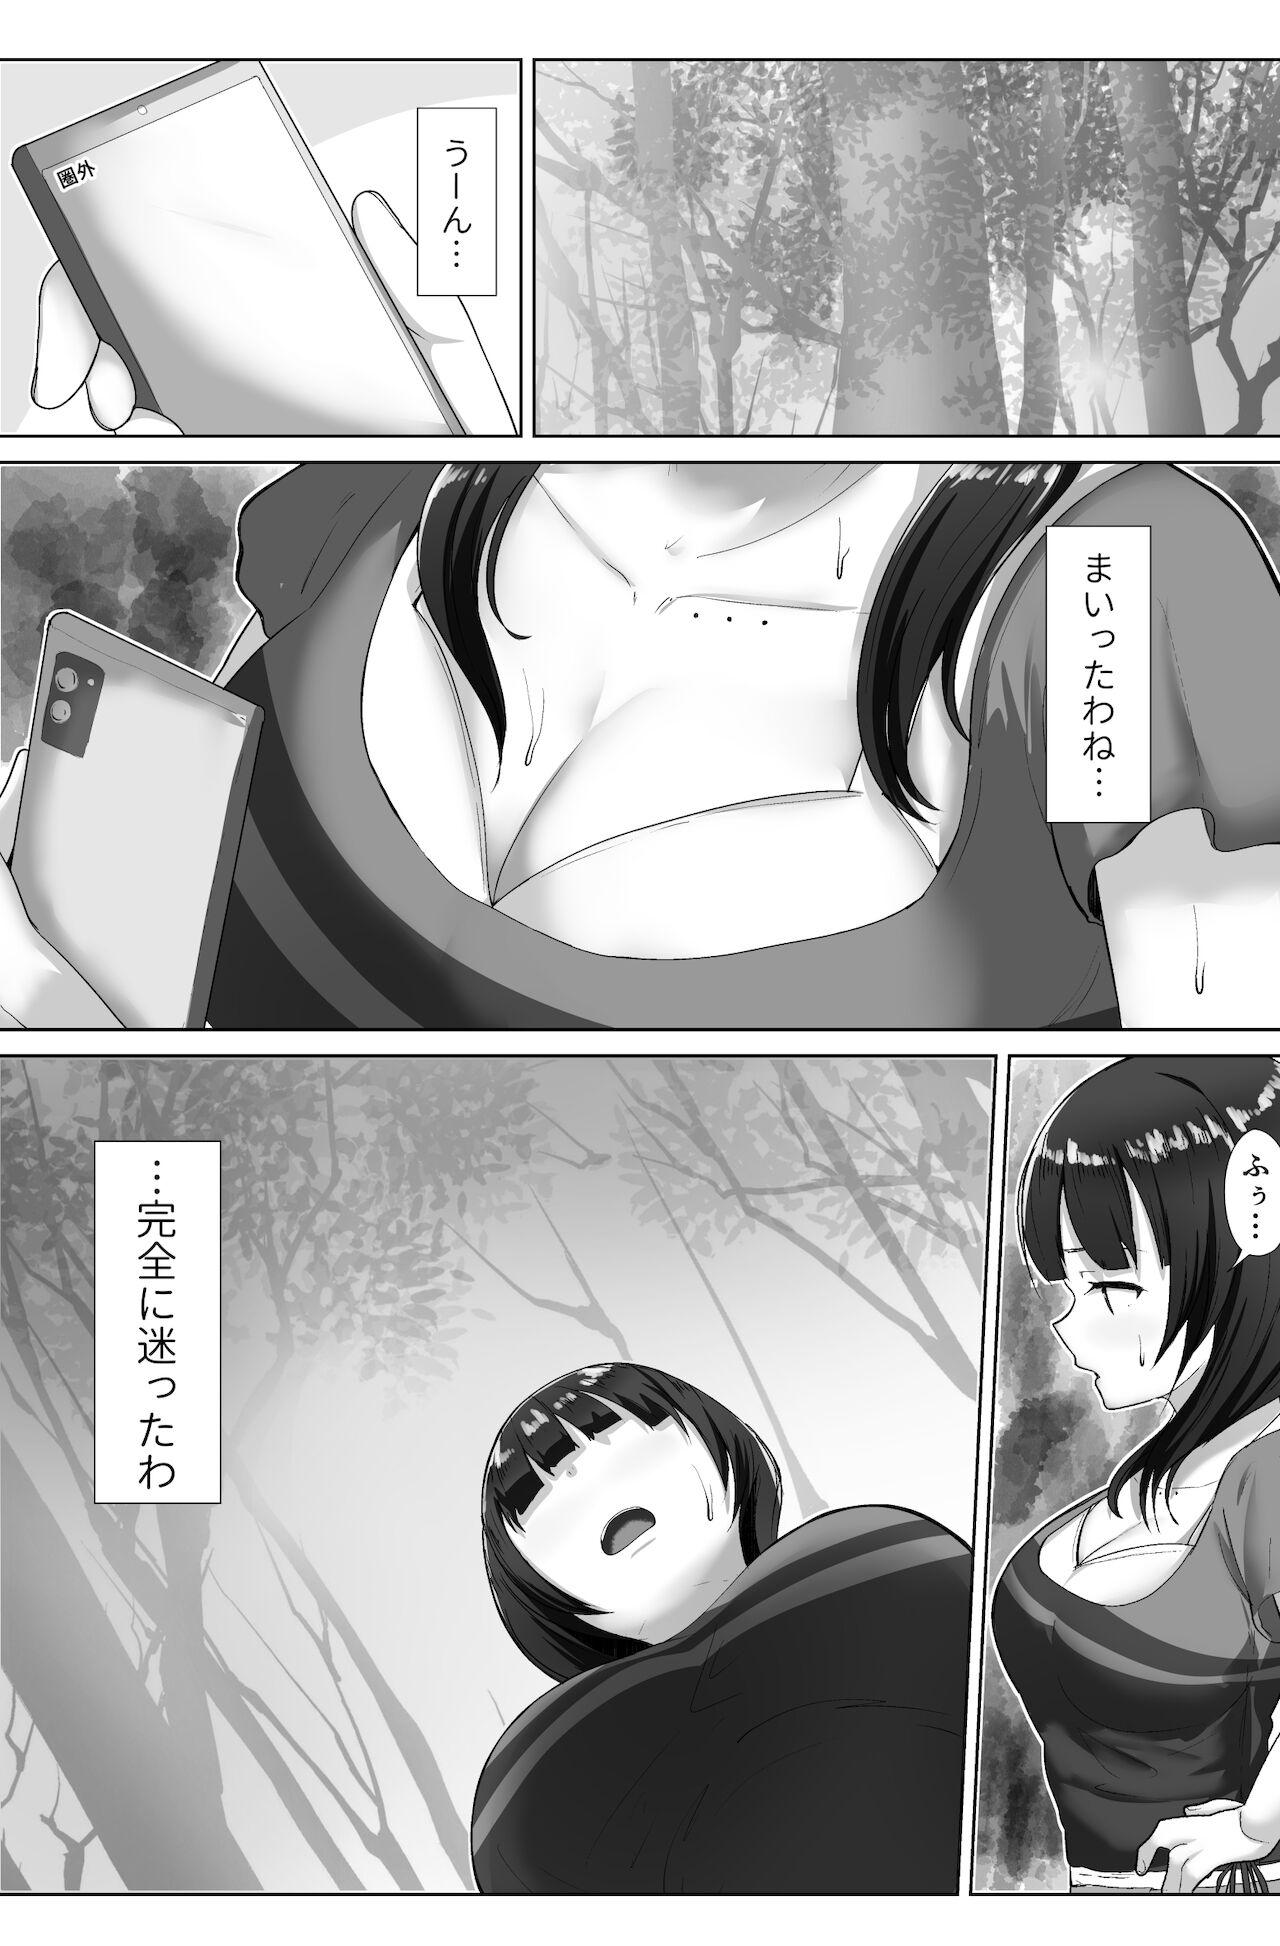 Cock Sucking e-rn fanbox short love live doujinshi collection - Love live Love live sunshine Asstomouth - Page 1